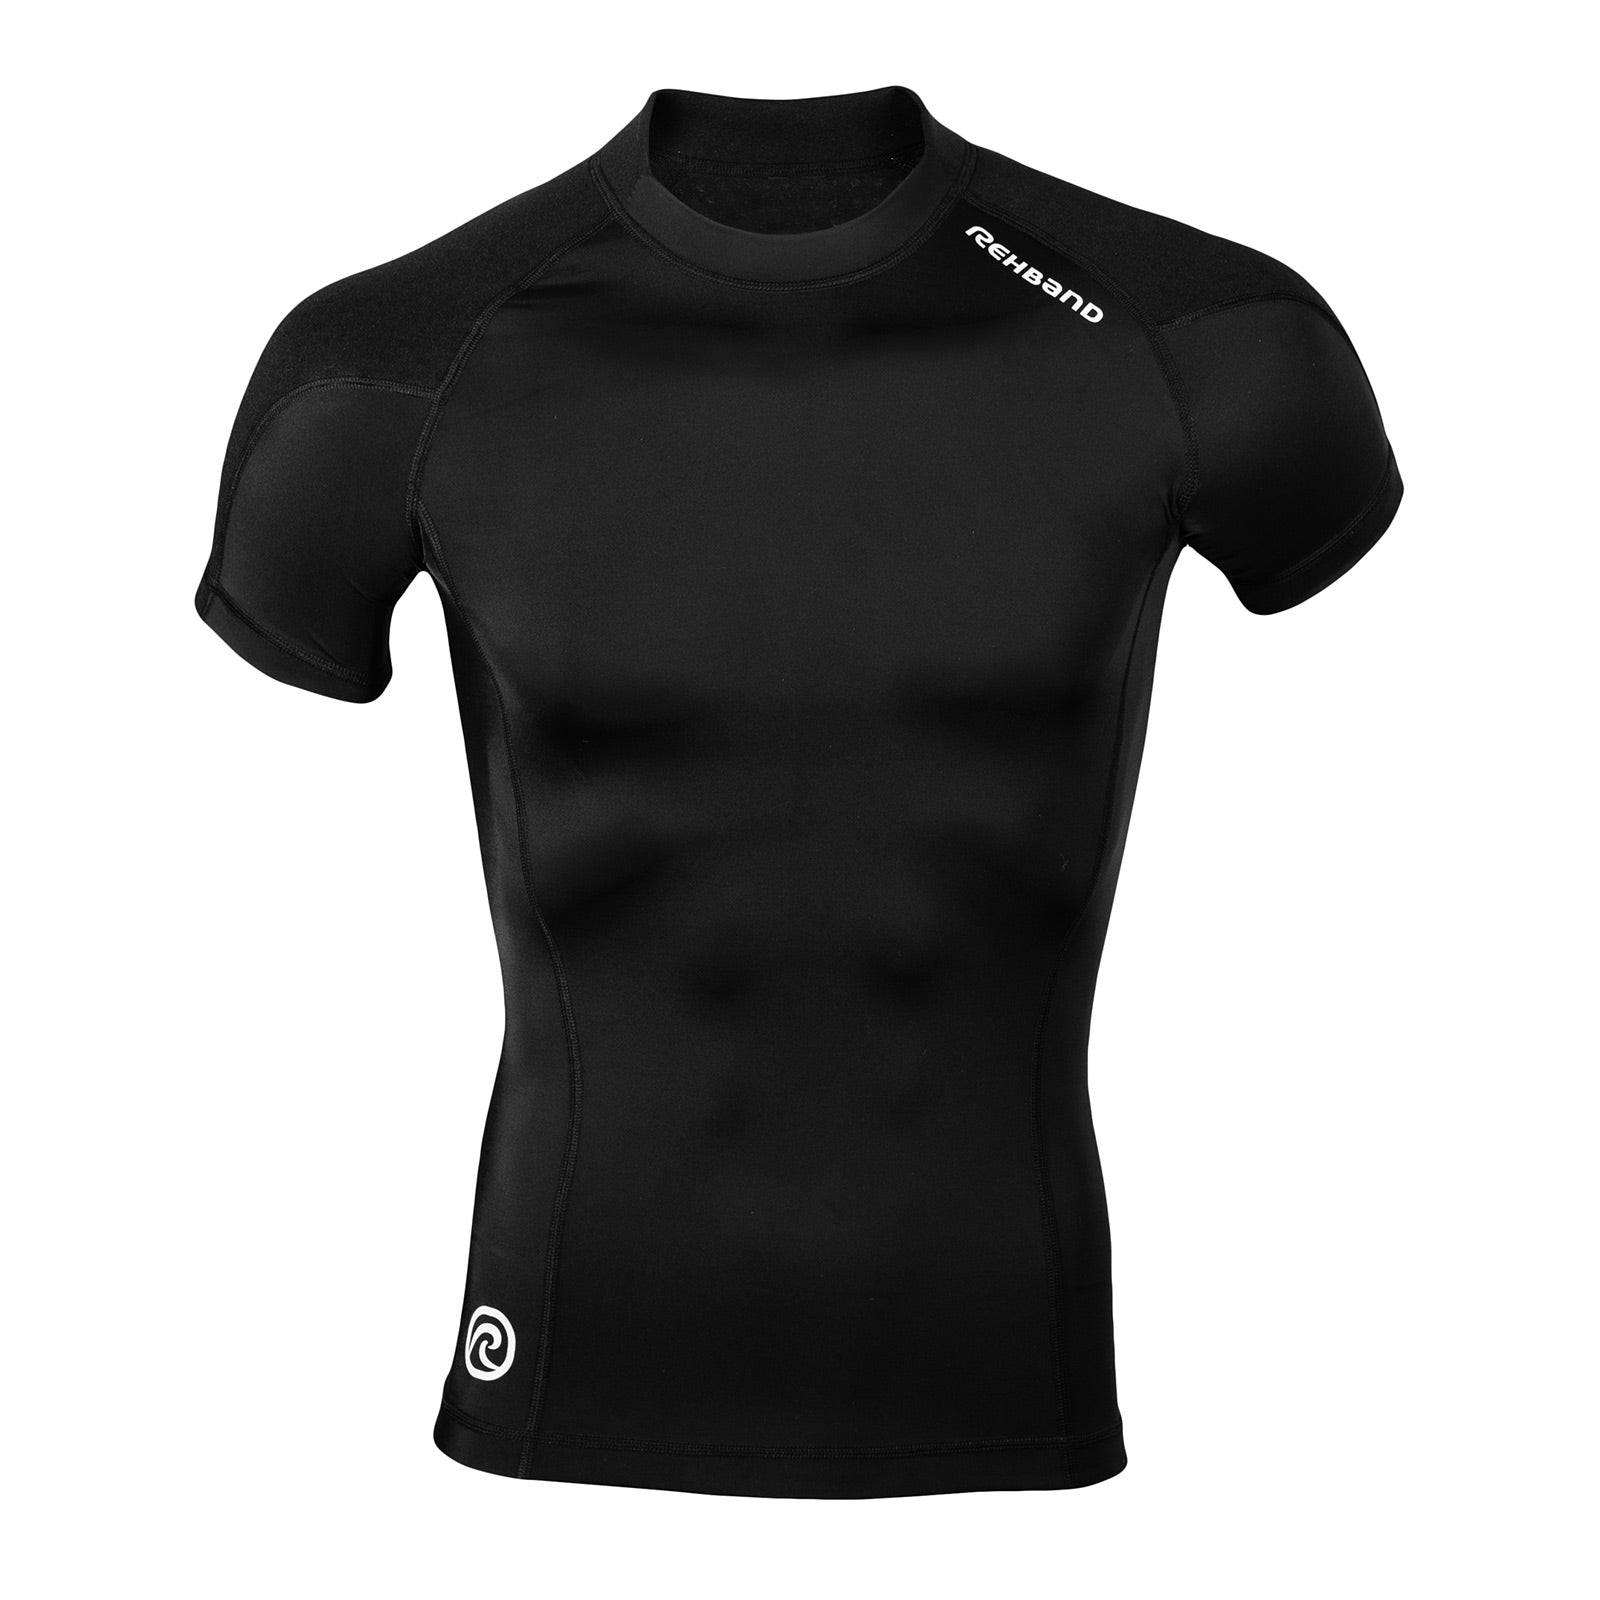 A black thermal zone top for men with a white rehband lettering at the top and logo at the bottom